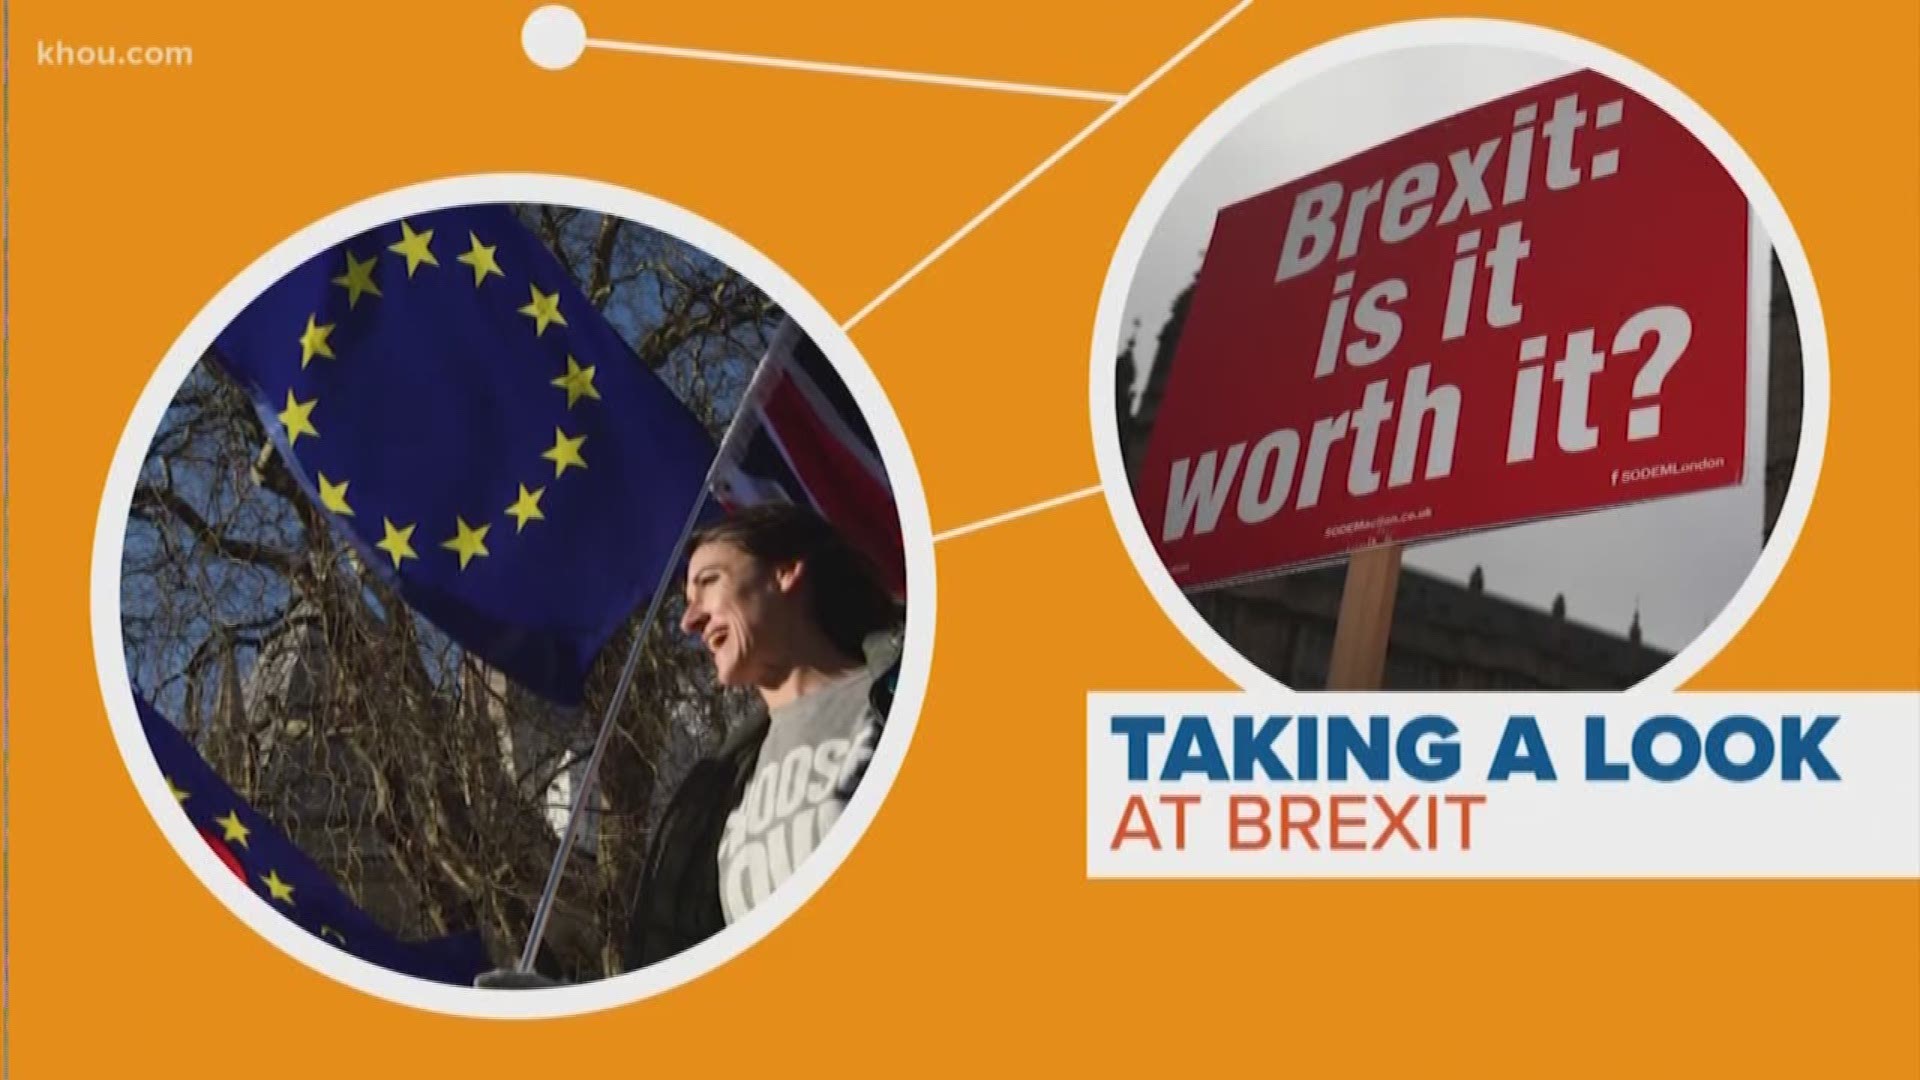 UK Prime Minister Theresa May is promising that Britain will leave the EU on March 29 of next year - no matter what. That's despite backlash from within her own cabinet, and calls for her resignation. Our Shern-min Chow connects the dots on what "Brexit"